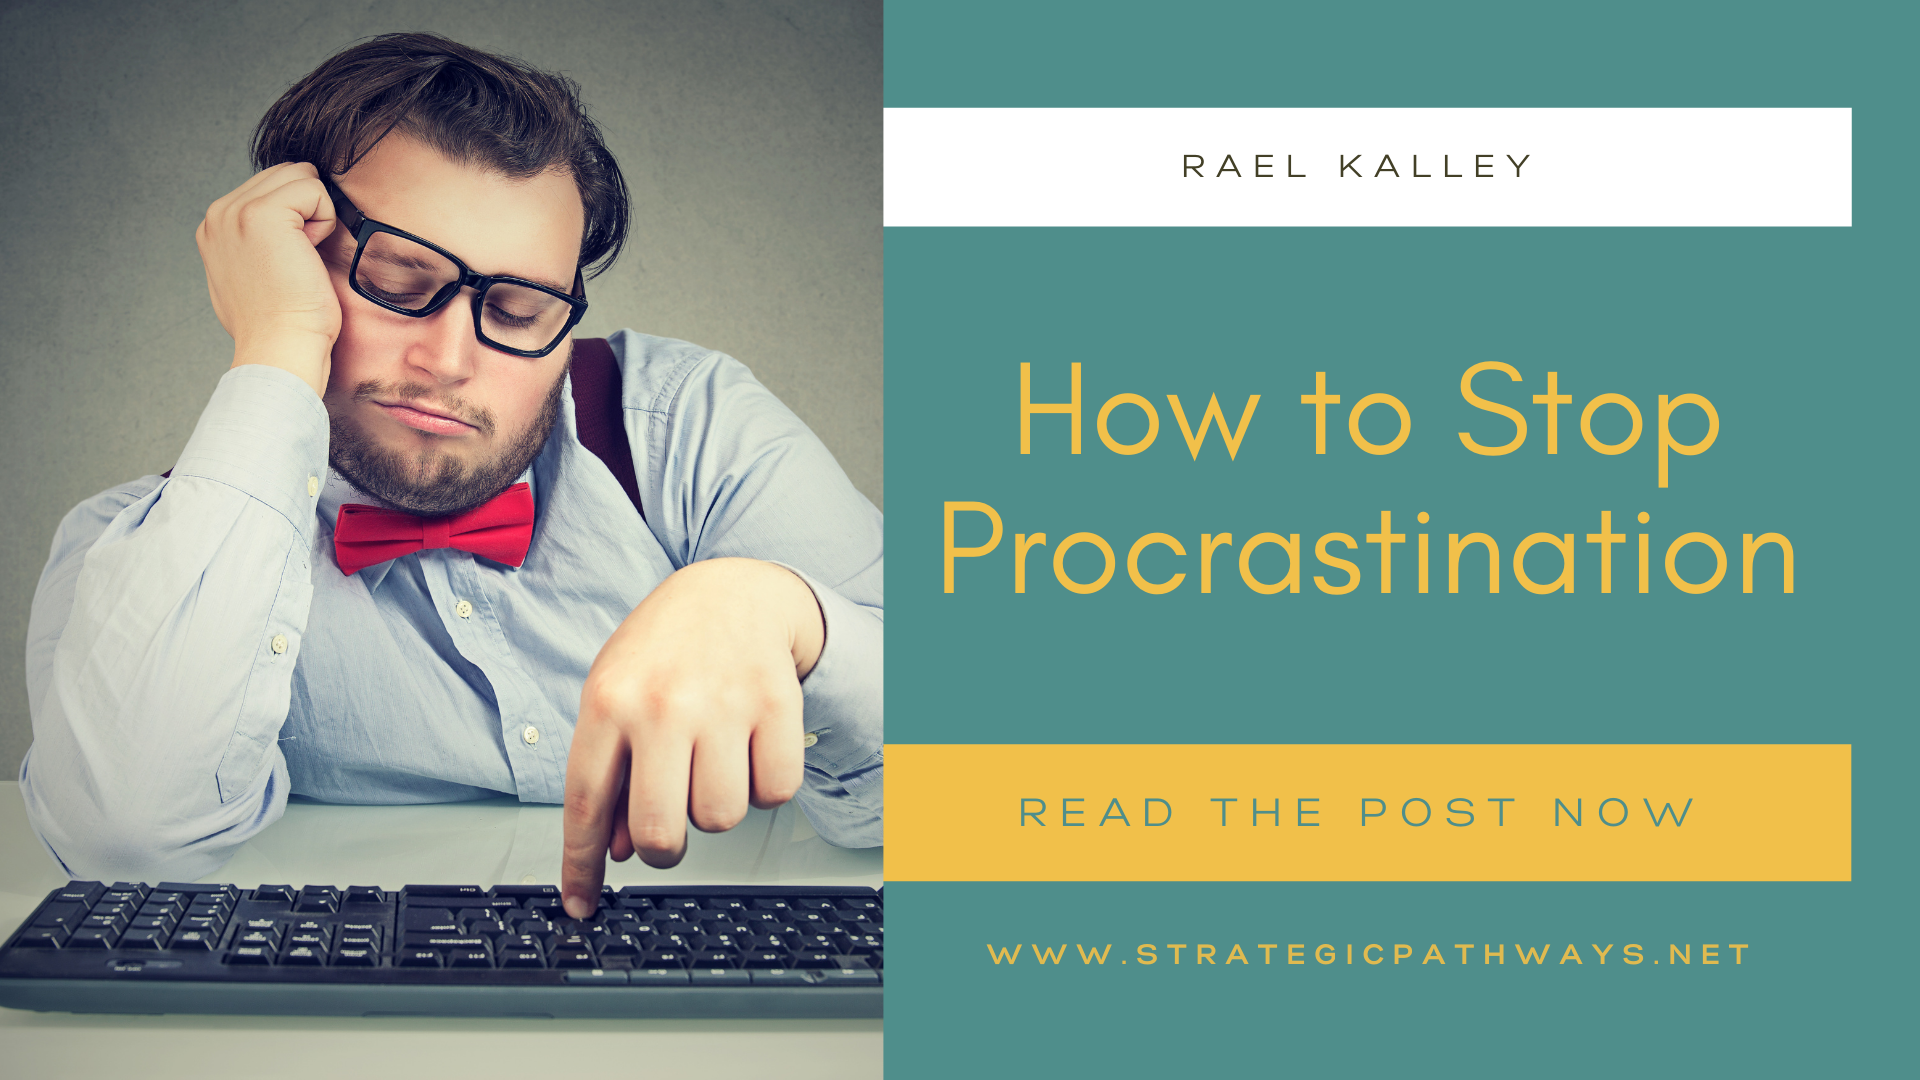 Text says "How to Stop Procrastination" and a man looking bored